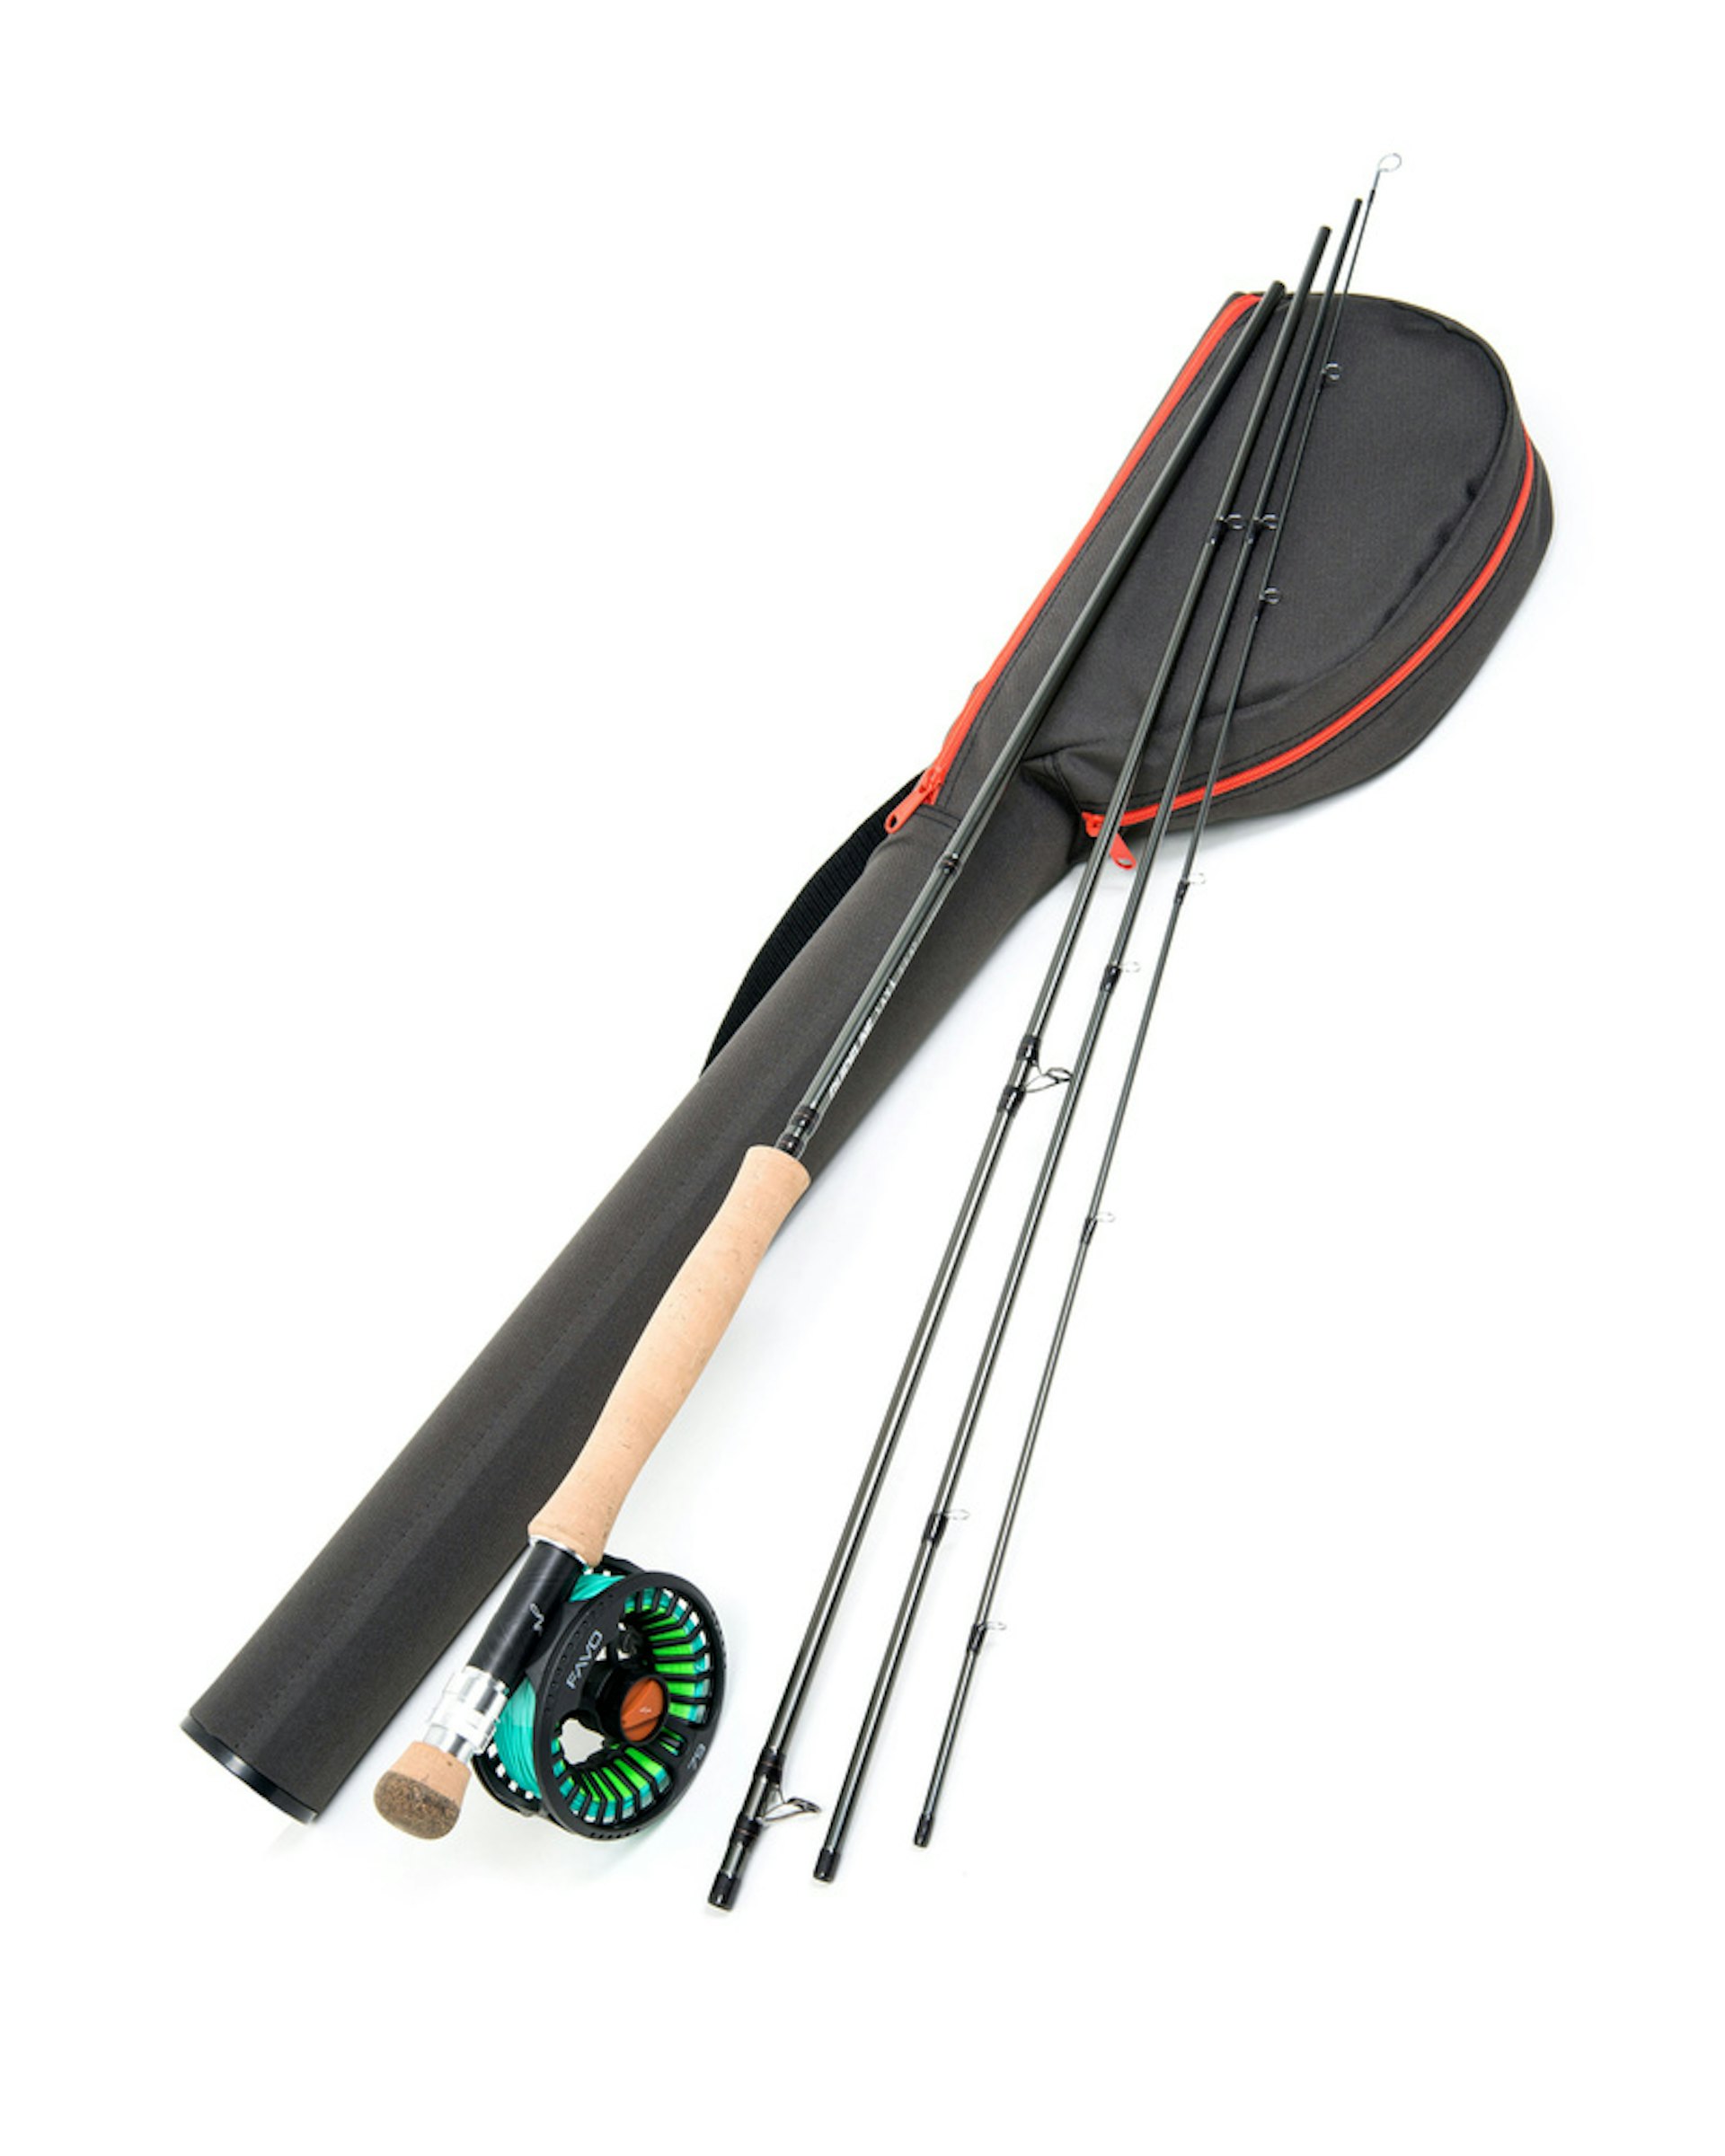 Three of a kind..show yours - Page 9 - The Classic Fly Rod Forum